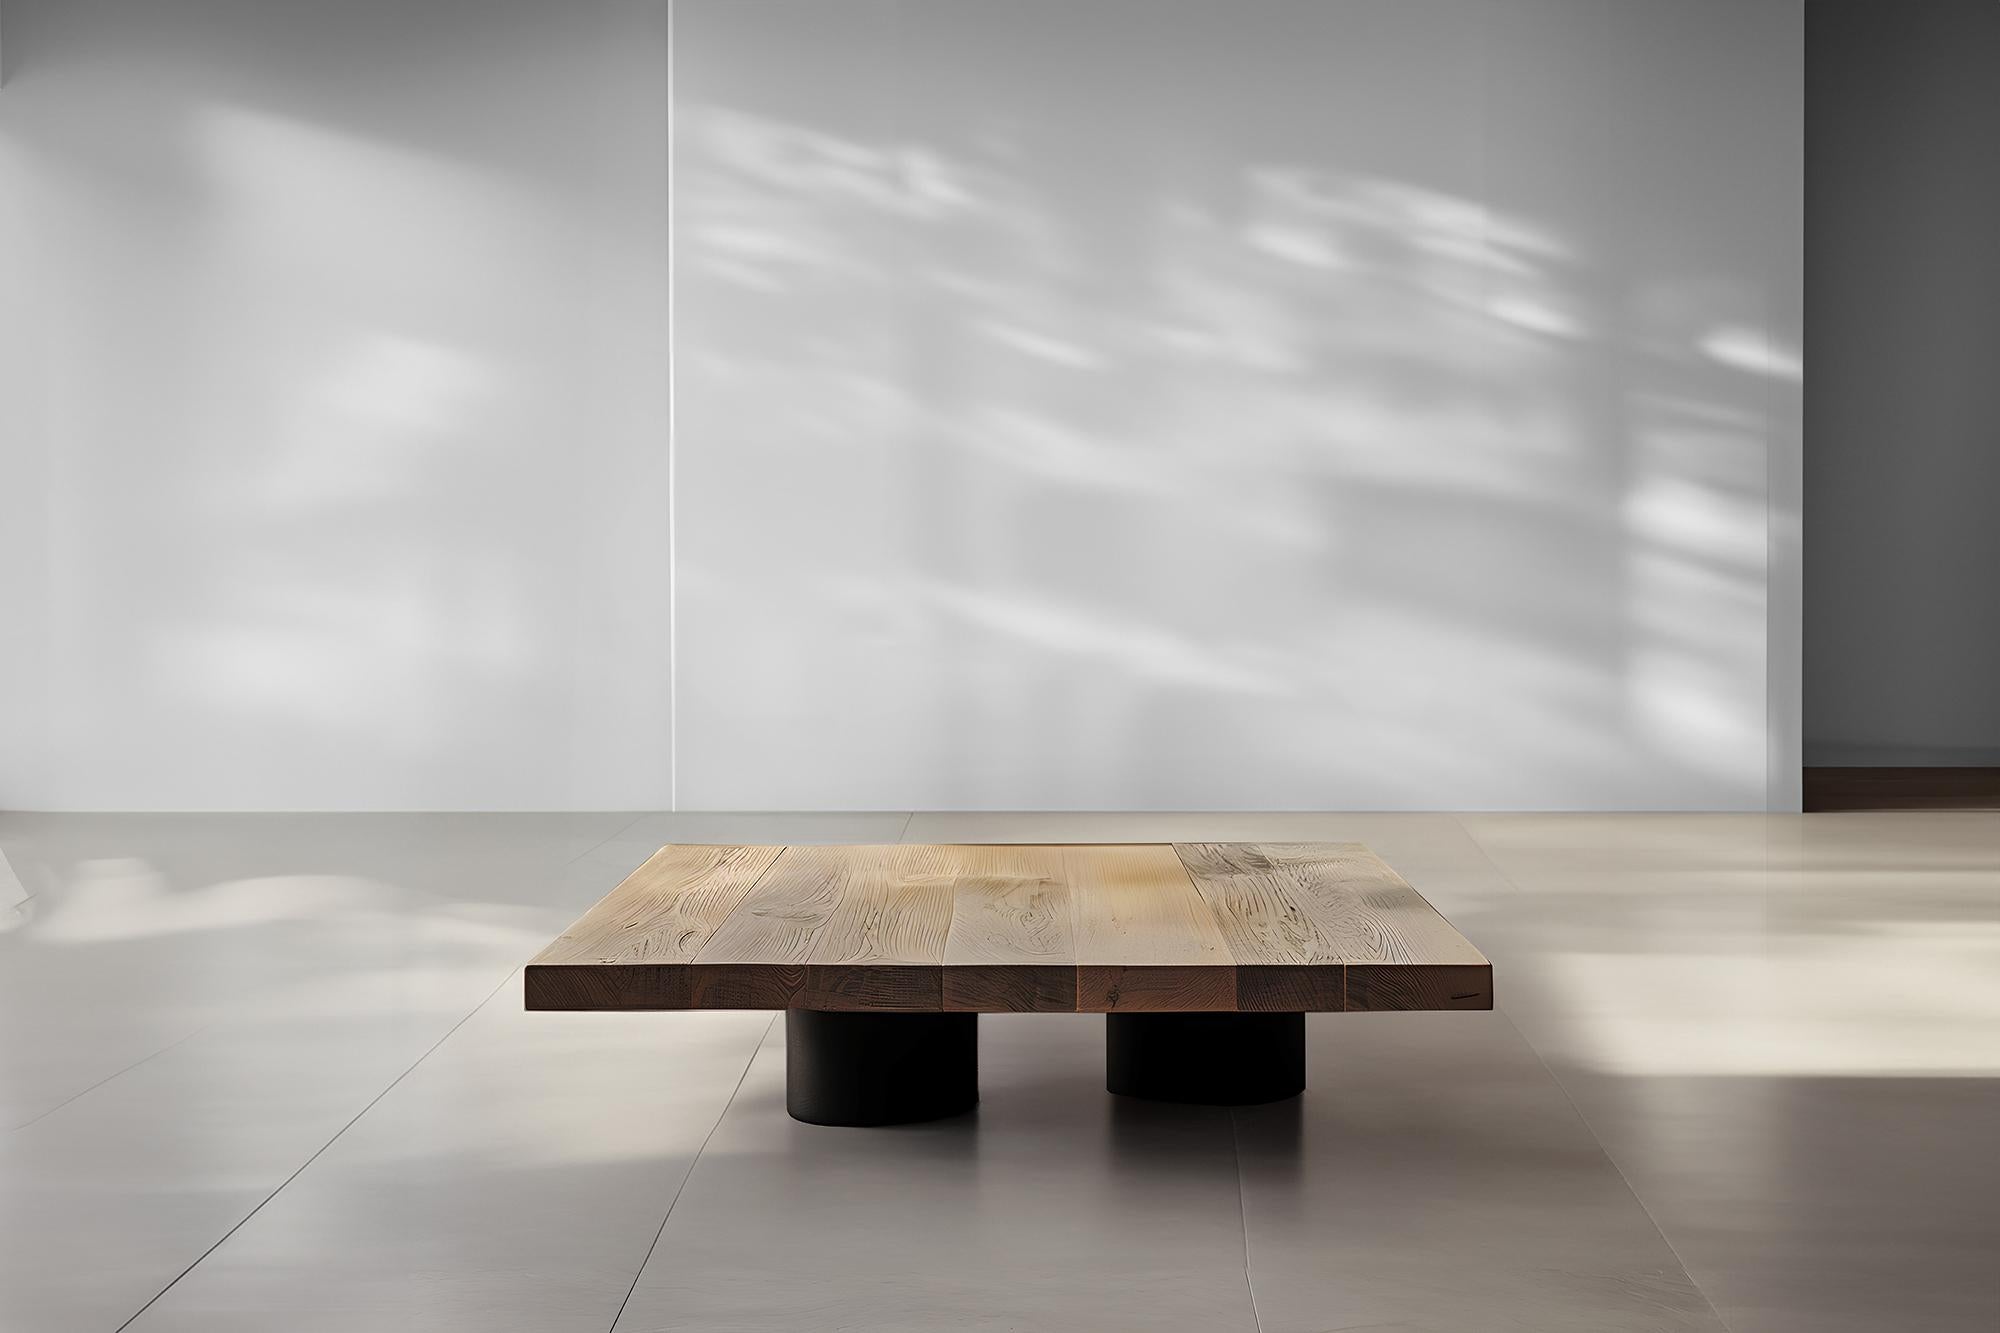 Mexican Natural Finish Rectangular Coffee Table - Classic Fundamenta 28 by NONO For Sale